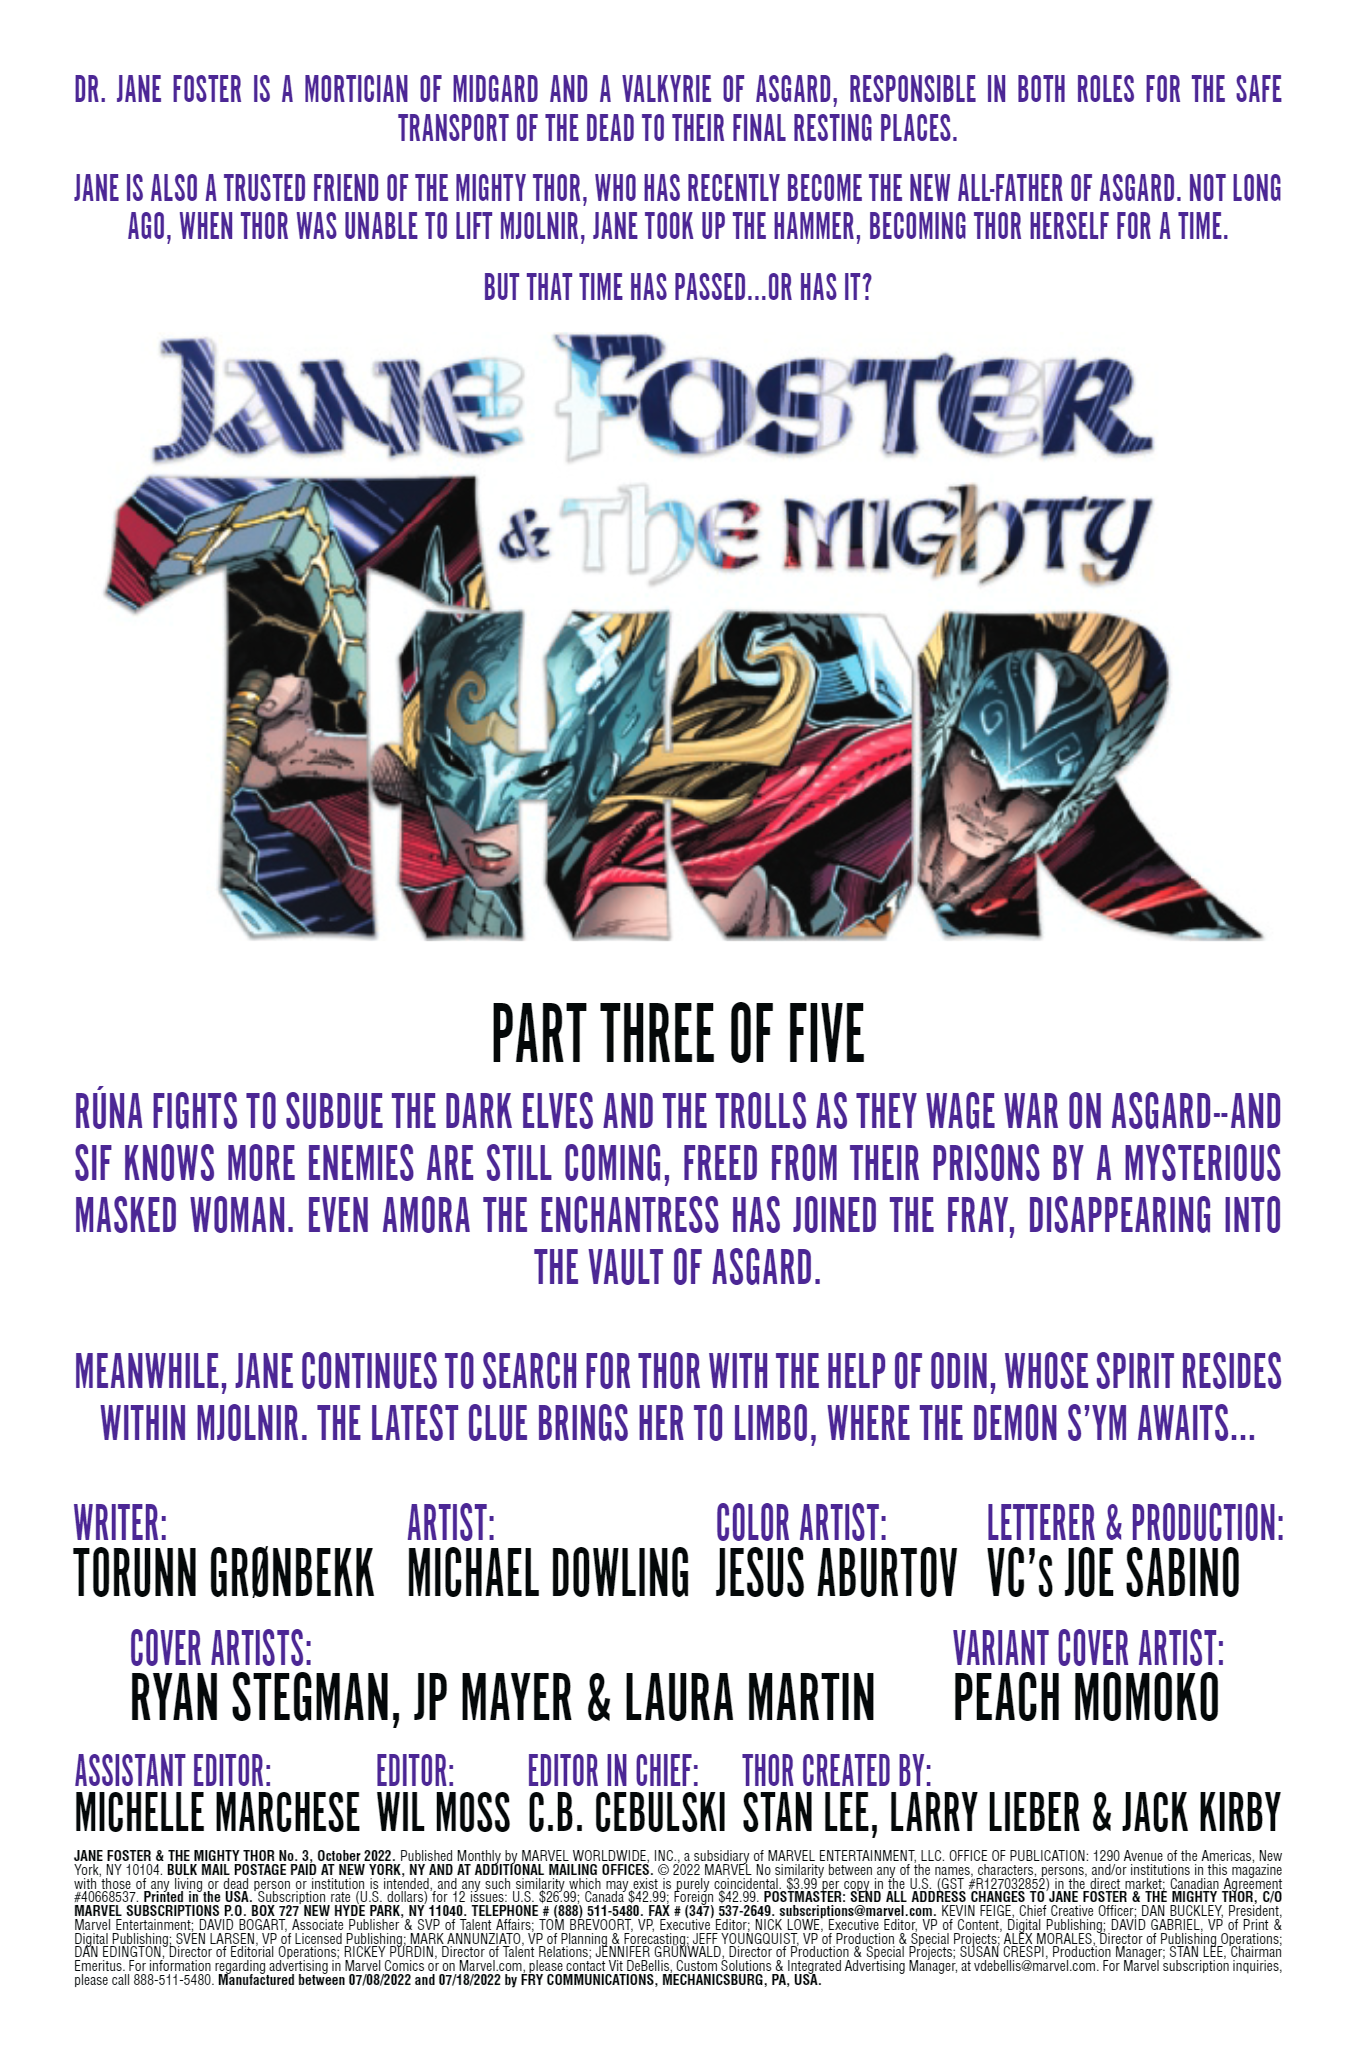 Jane Foster and the Mighty Thor 3 - 2